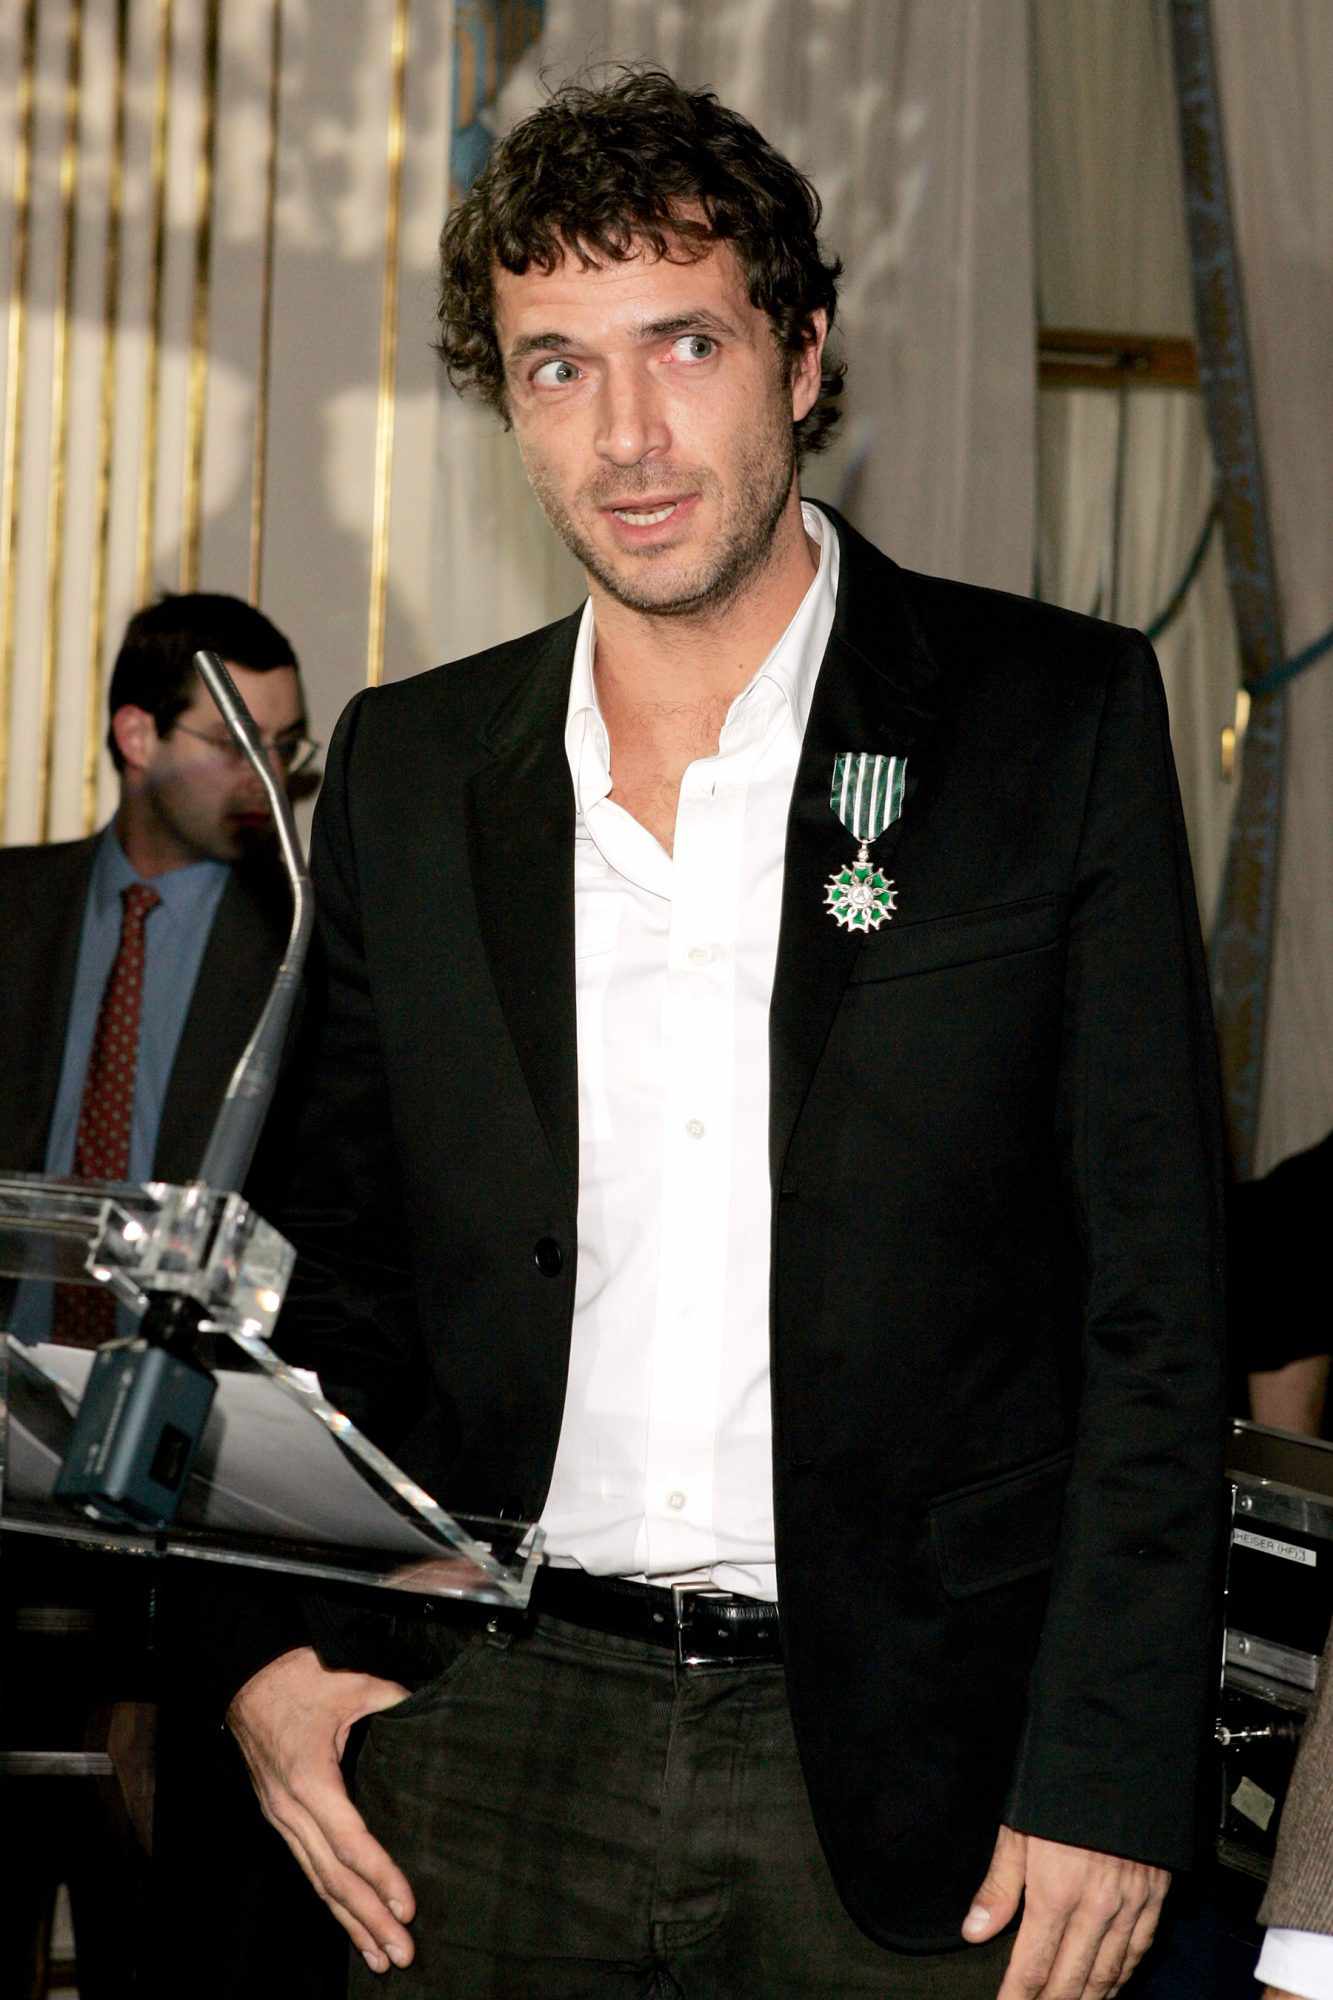 <p>Zdar, the influential French music producer best known as one half of electro duo Cassius and for his work with artists ranging from Kanye West to Phoenix, died in a freak accident in Paris on June 19. He was 52.</p>
                            <p>According to a report in the New York Times, Zdar fell through a window on a high floor in a Parisian building. The death was confirmed by Zdar's booking agent in an email to the outlet. The BBC reported that the French police are investigating the case as a routine accident.</p>
                            <p>Born Philippe Cerboneschi, Zdar teamed up with Hubert "Boom Bass" Blanc-Francard to form Cassius in 1988, and their debut album 1999 went on to shape the electronic music genre known as "French Touch."</p>
                            <p>Zdar leaves behind wife Dyane Cerboneschi and three children.</p>
                            